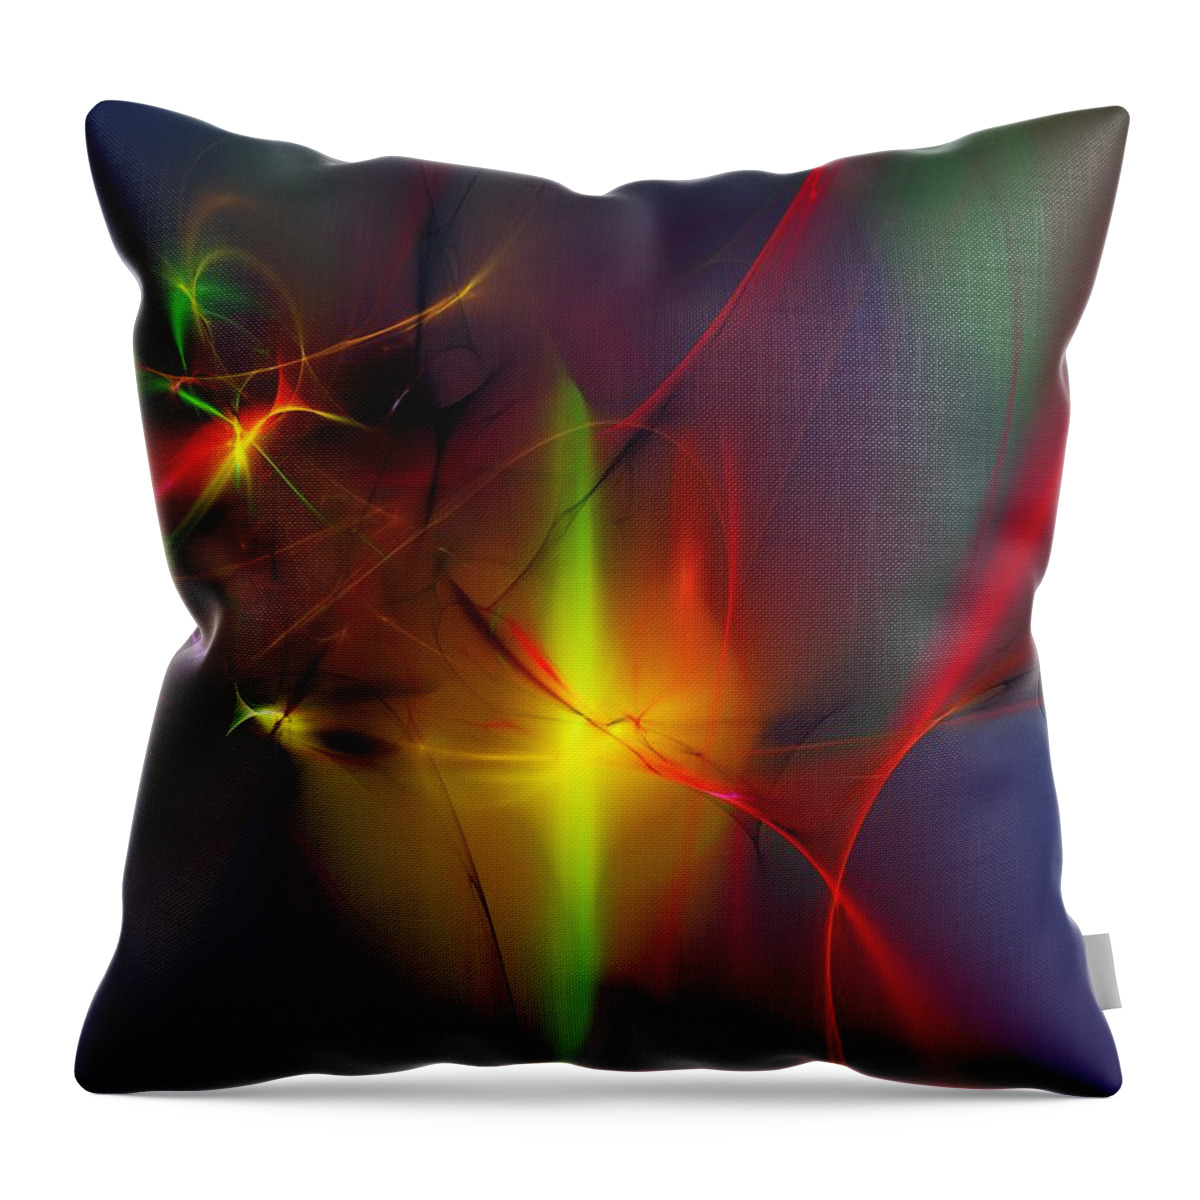 Digital Painting Throw Pillow featuring the digital art Pixie Dance by David Lane